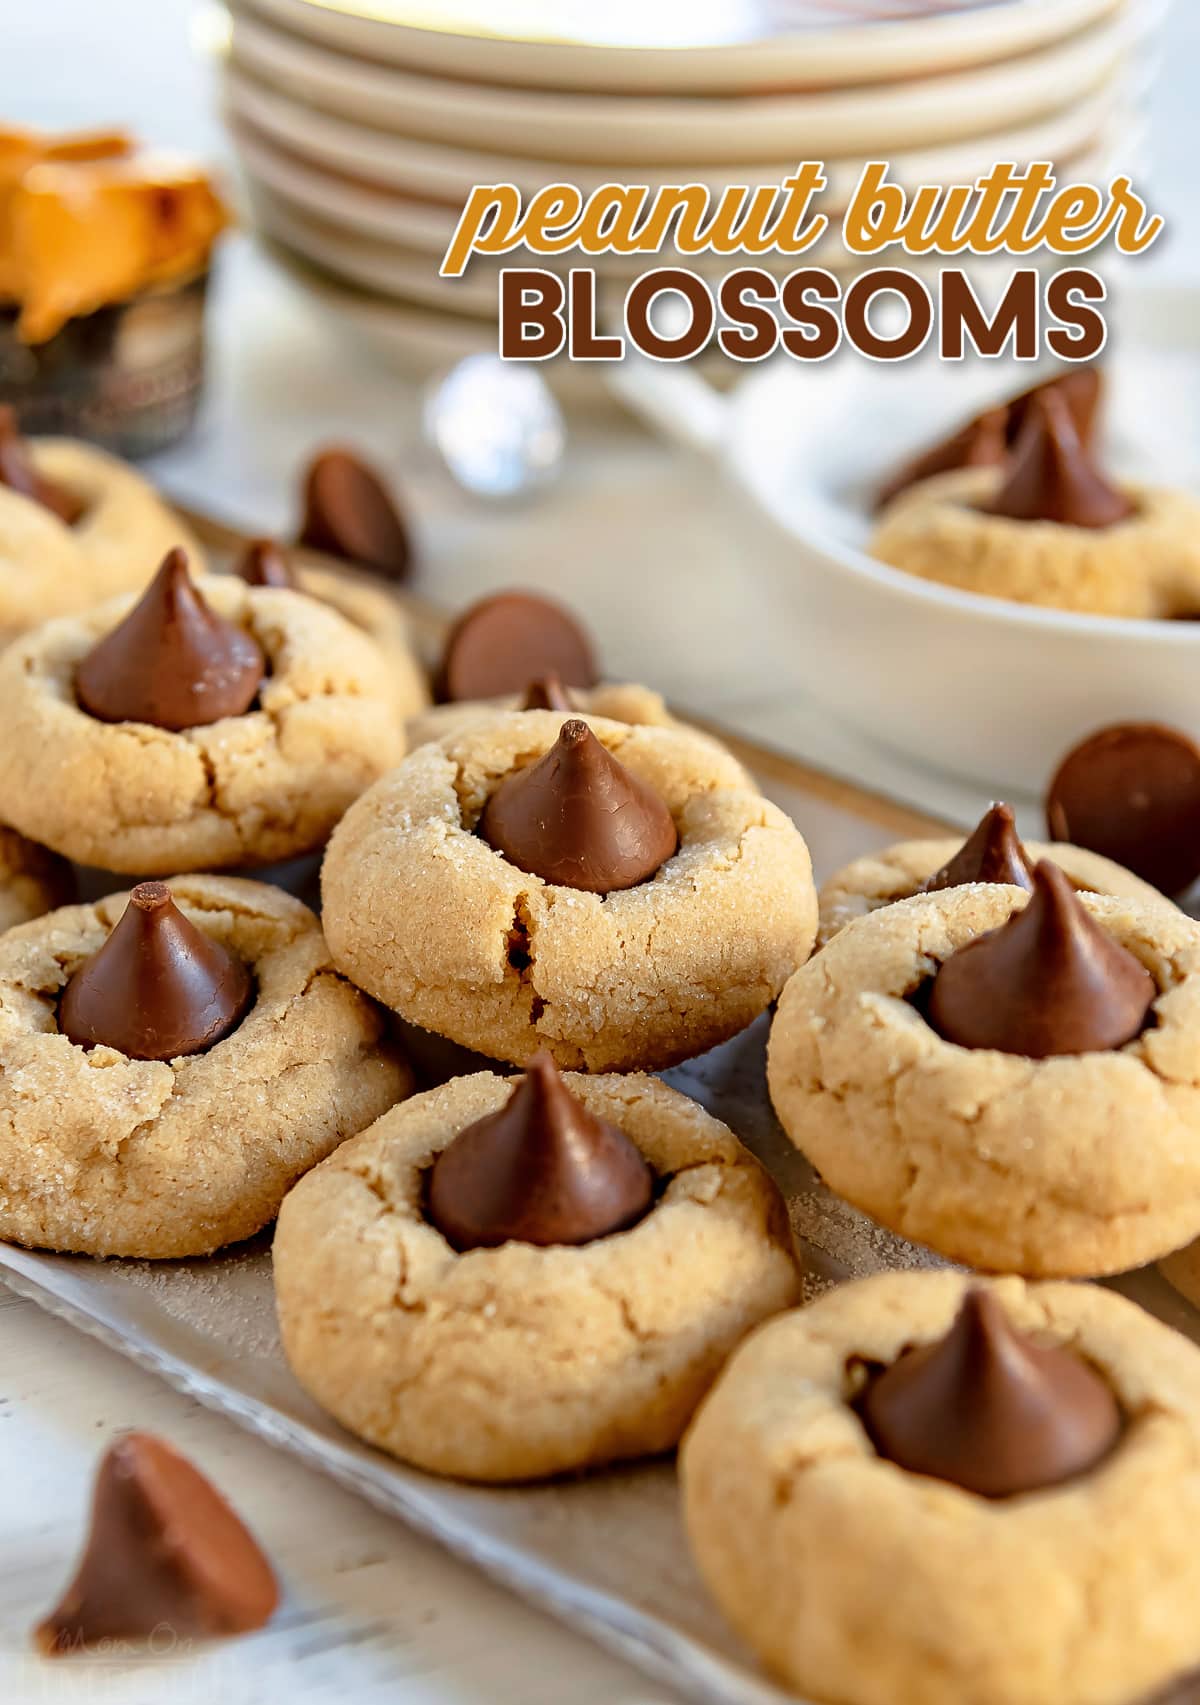 peanut butter blossoms stacked on metal serving tray with title overlay at top of image